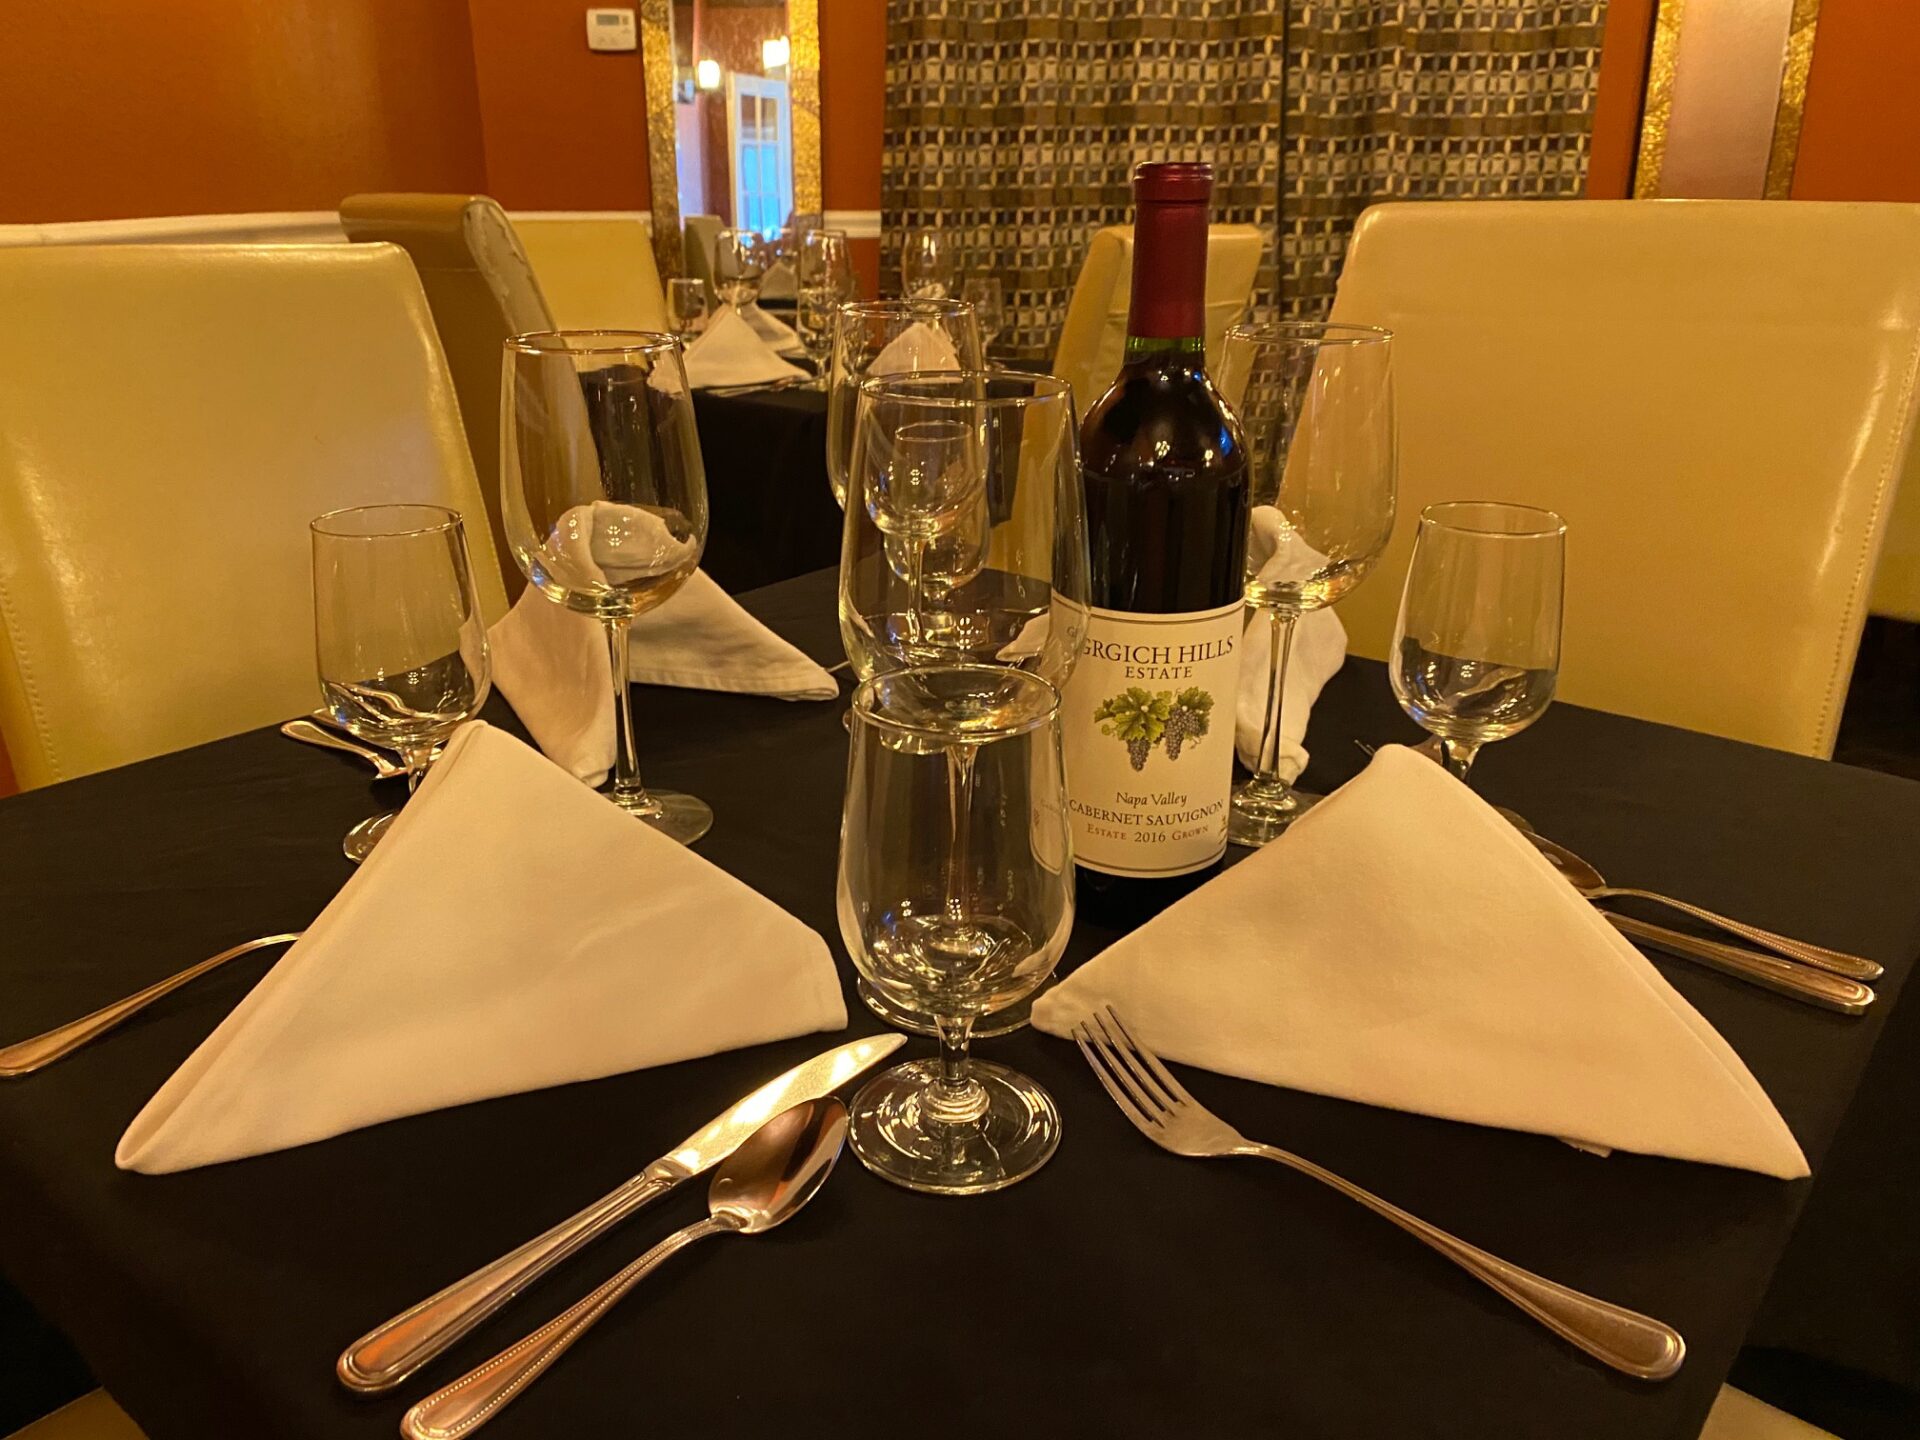 Table covered in a black cloth and set up with napkins, utensils, wine glasses, and a wine bottle